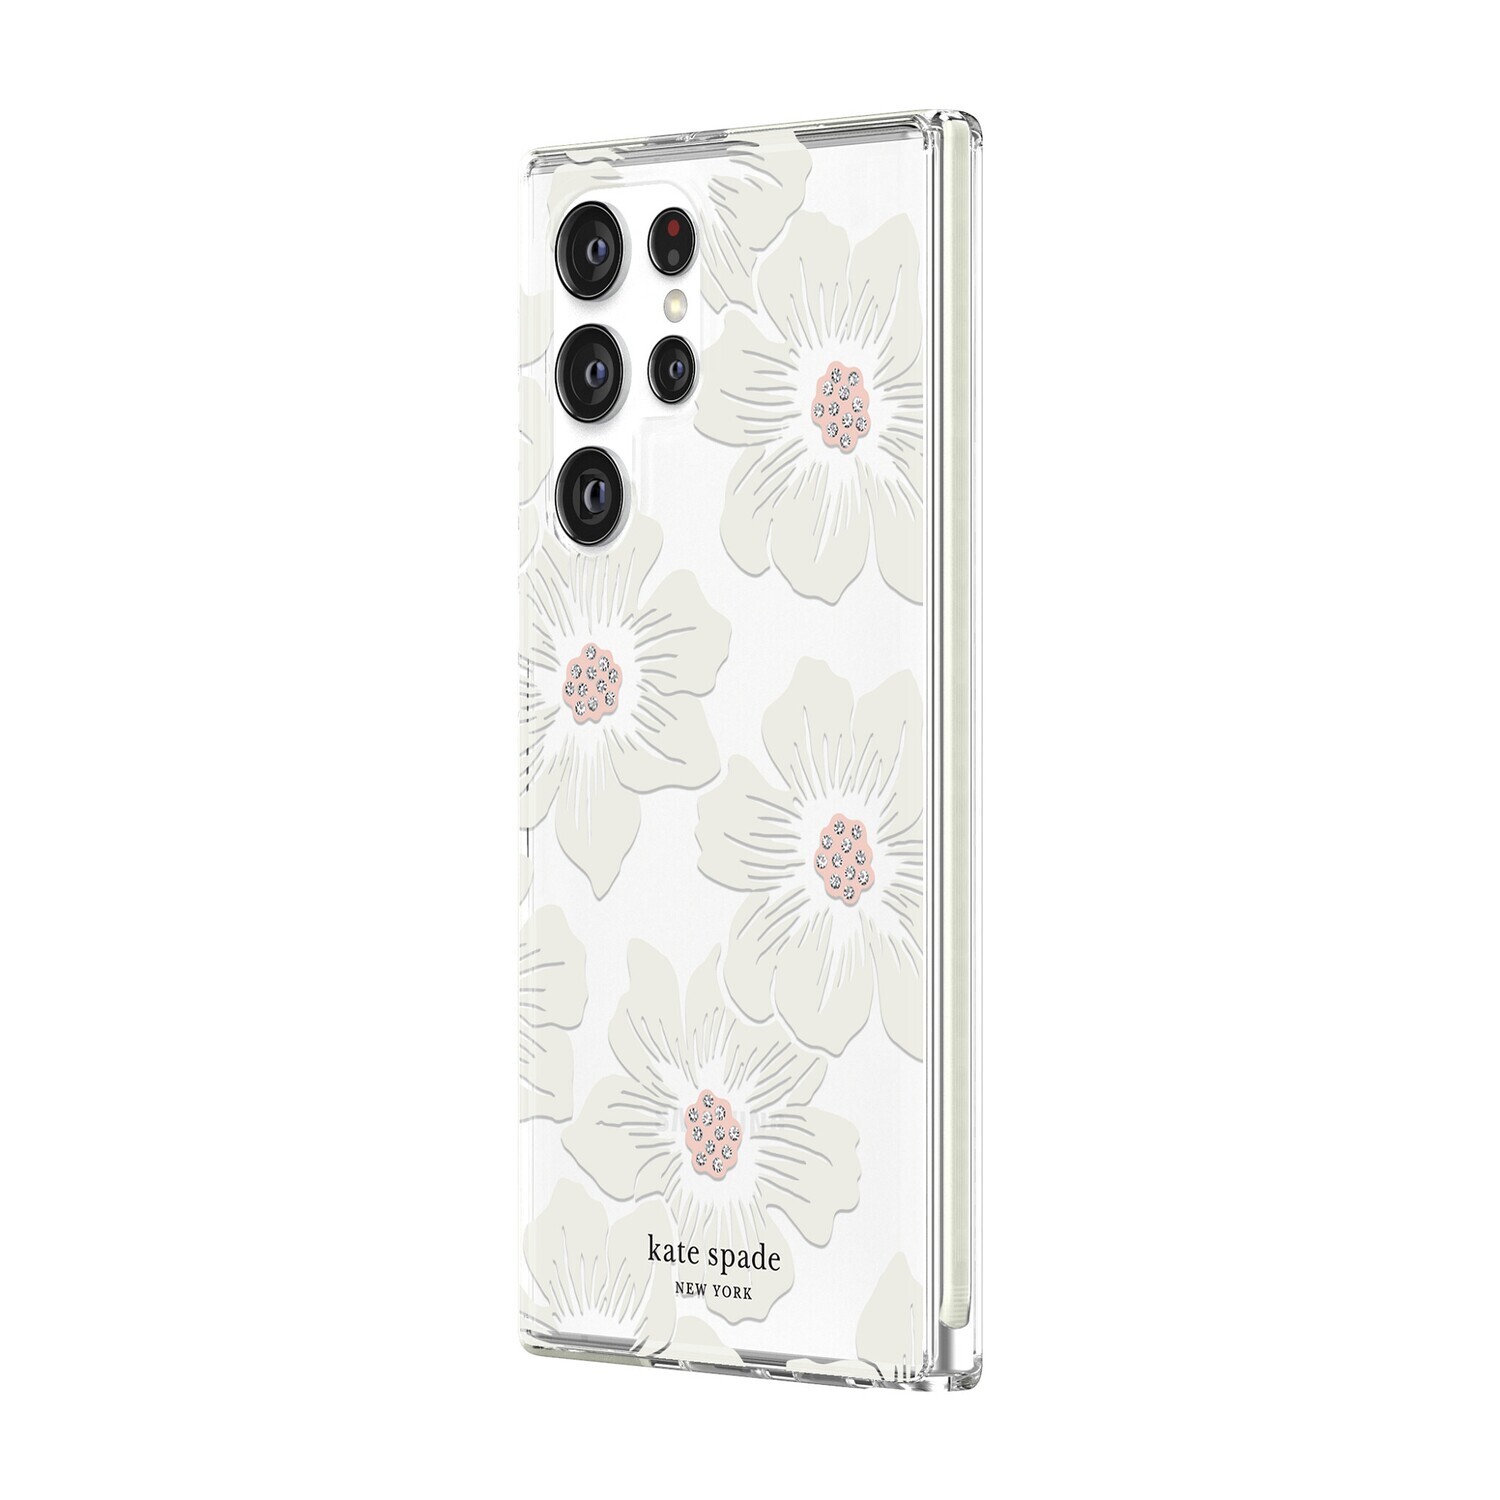 Kate Spade Samsung Galaxy S22 Ultra 5G 6.8" Defensive Hardshell, Hollyhock Floral Clear/Cream with S